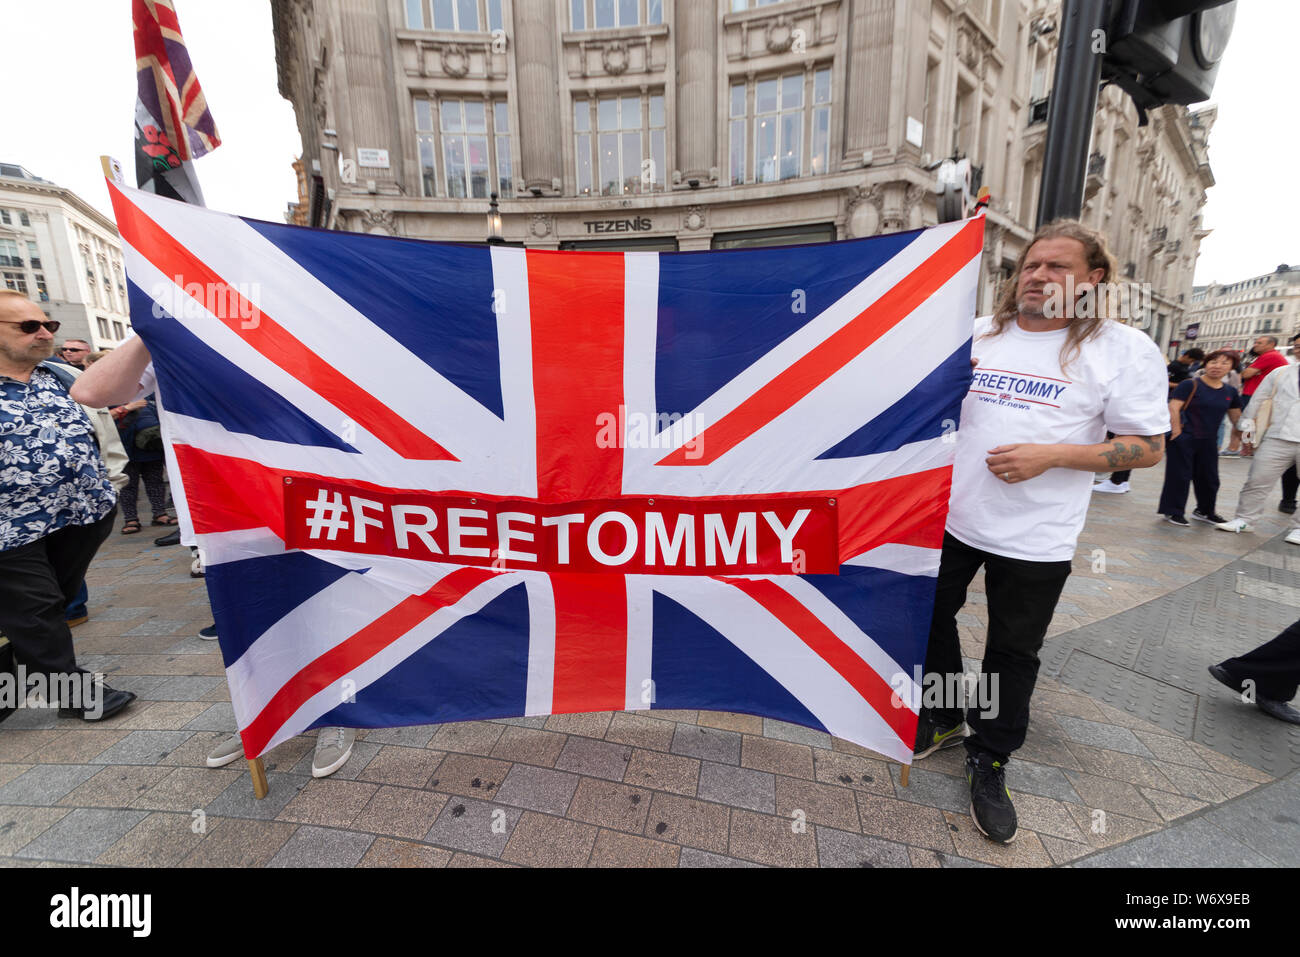 A rally is taking place in London protesting against the imprisonment of Stephen Yaxley-Lennon, who goes by the name of Tommy Robinson, and is serving a prison sentence in Belmarsh prison having been found guilty of contempt of court Stock Photo